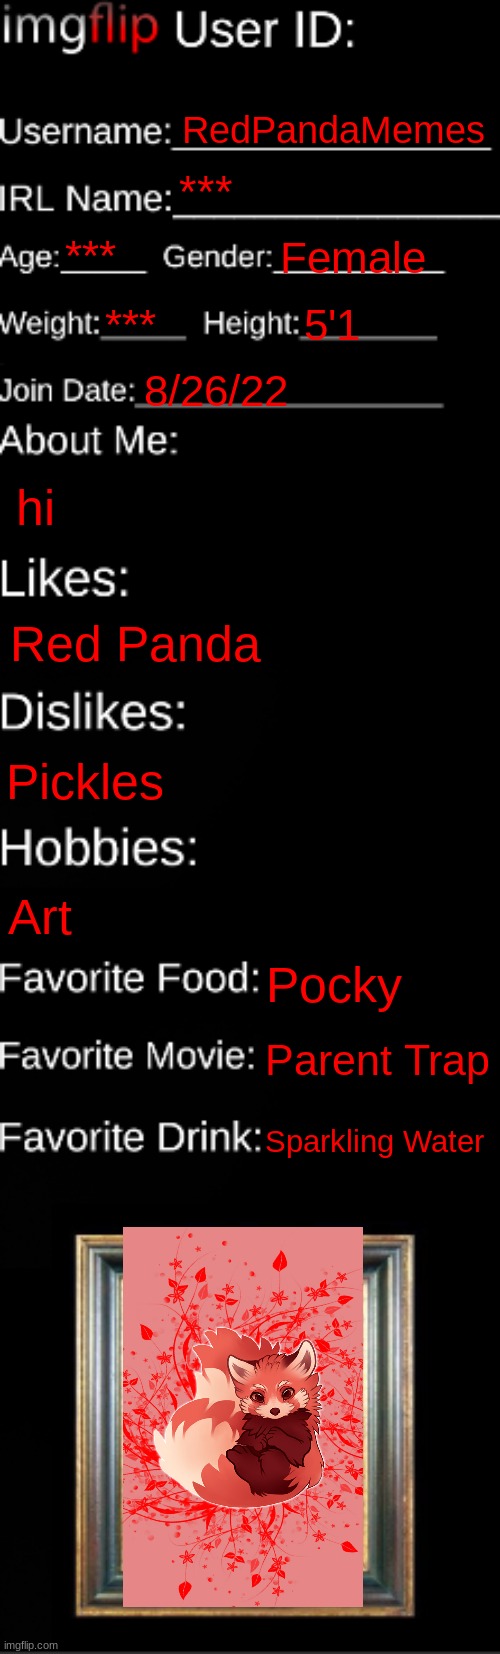 Me | RedPandaMemes; ***; ***; Female; ***; 5'1; 8/26/22; hi; Red Panda; Pickles; Art; Pocky; Parent Trap; Sparkling Water | image tagged in imgflip id card | made w/ Imgflip meme maker